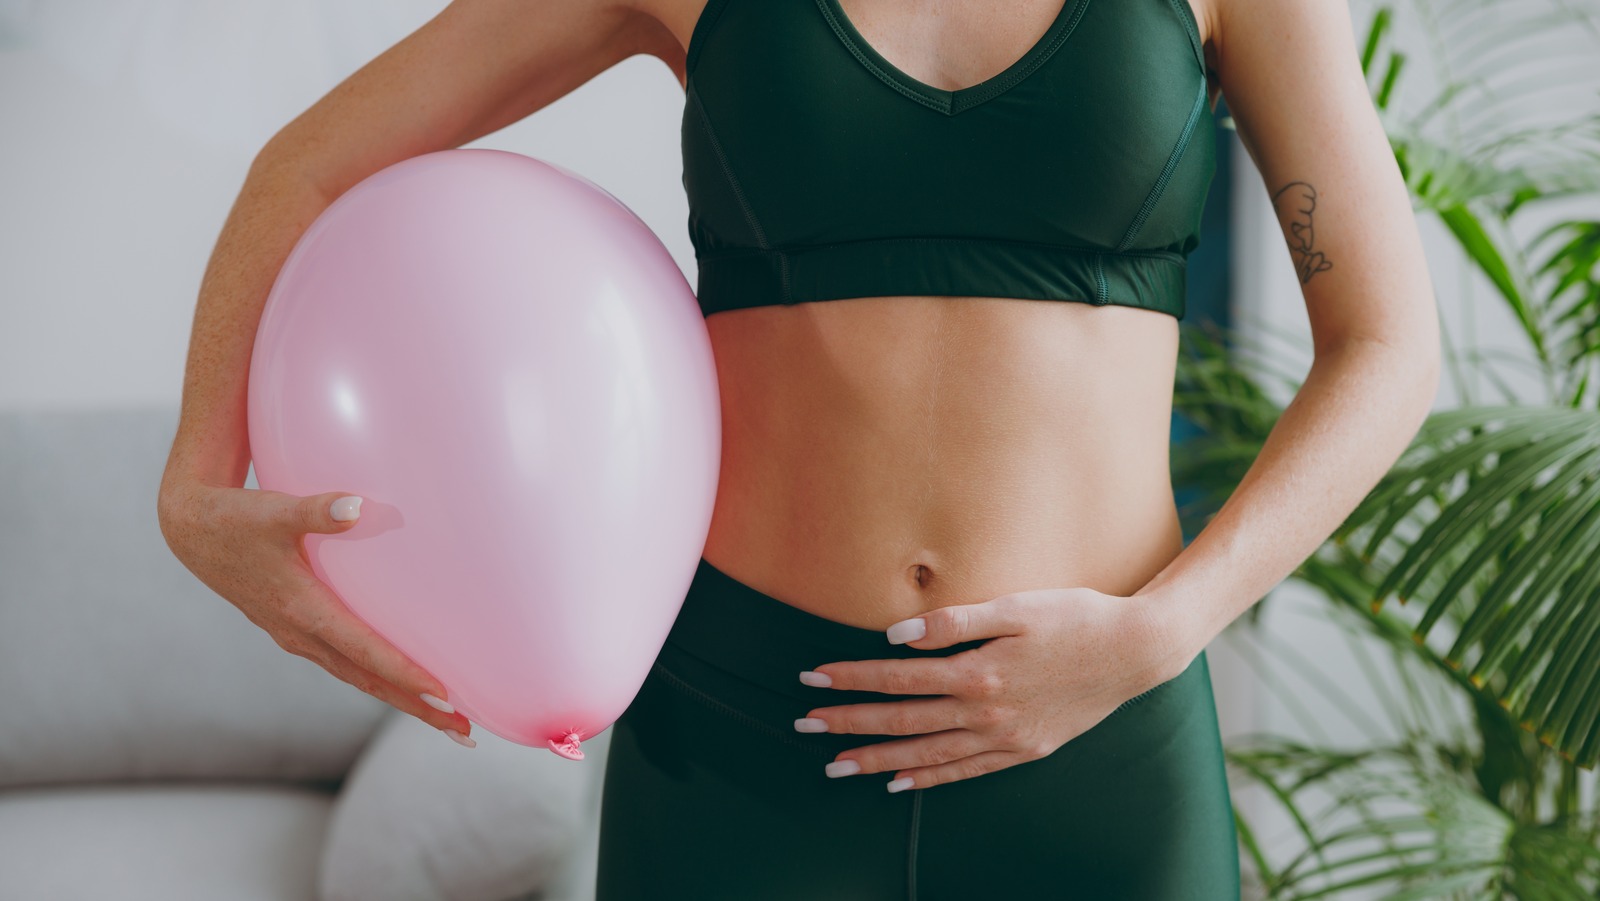 We Tried TikTok's Viral Balloon Hack To Poop Instantly. Here's How It Went - Health Digest